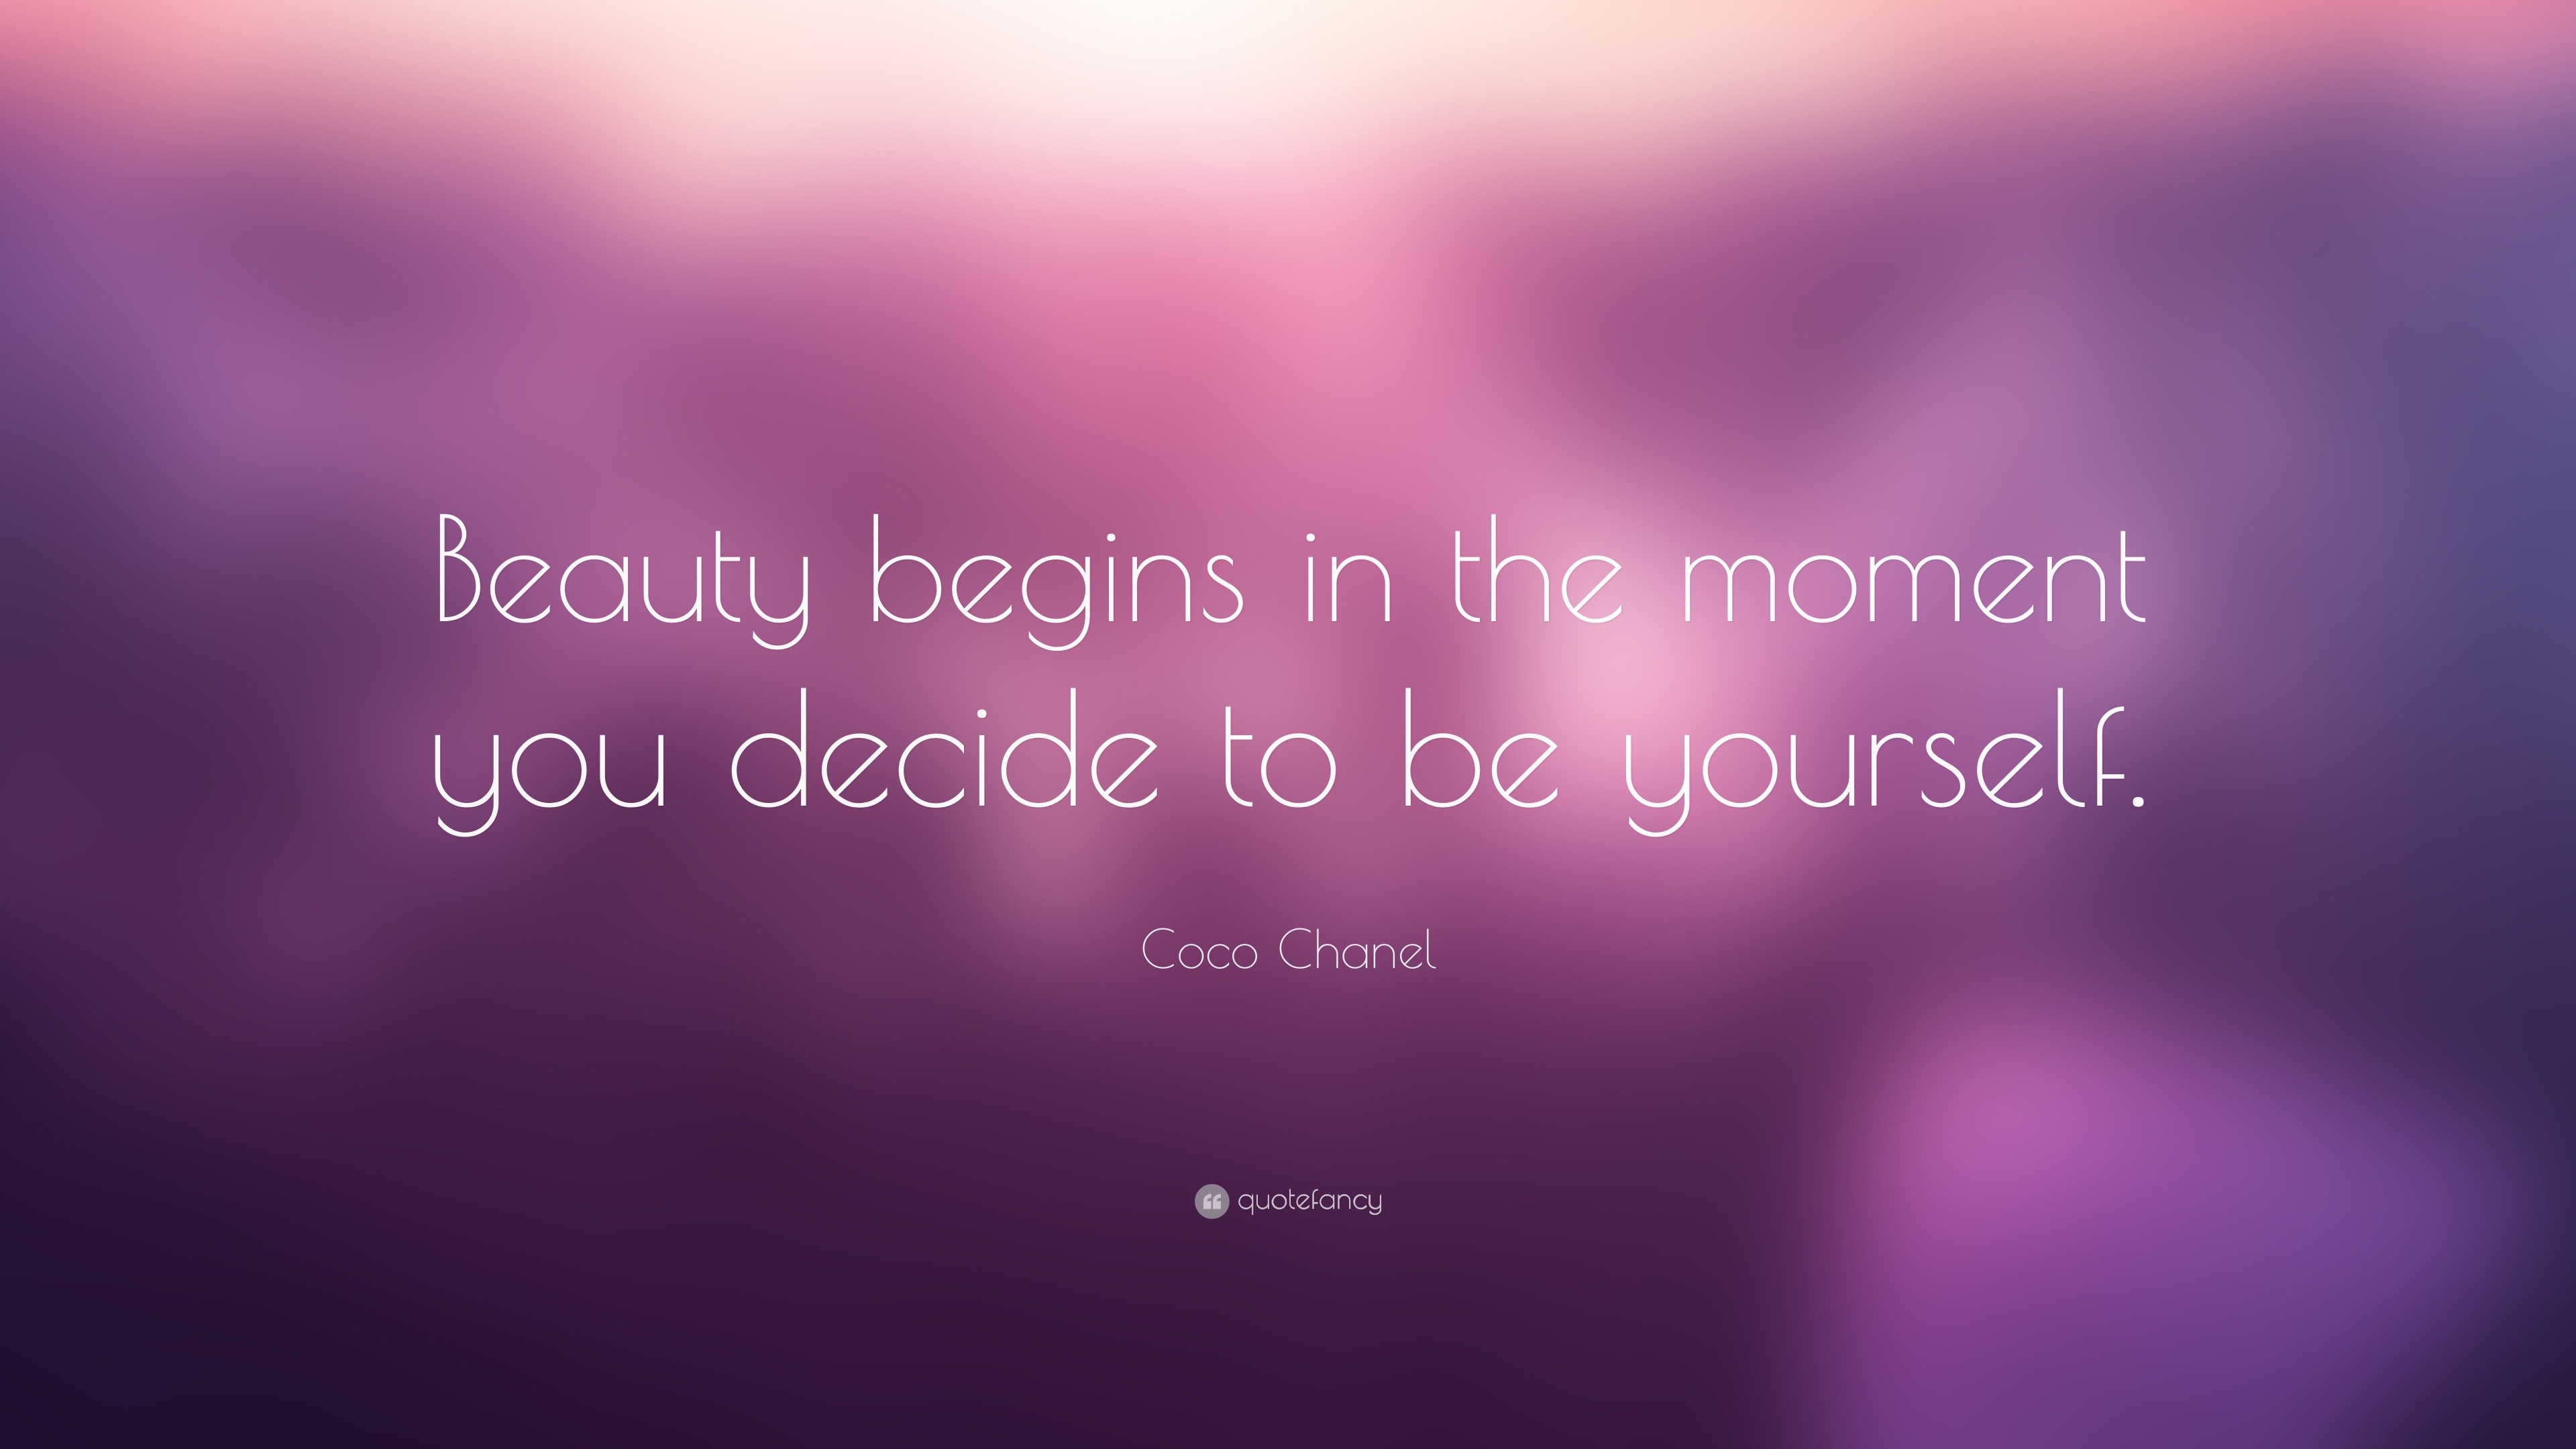 Vera Mont  VERA MONT QUOTE OF THE DAY  Beauty begins the moment you  decide to be yourself  Coco Chanel  Veramont quote beauty fashion  inspiration gold glitter cocochanel chanelquote  Facebook